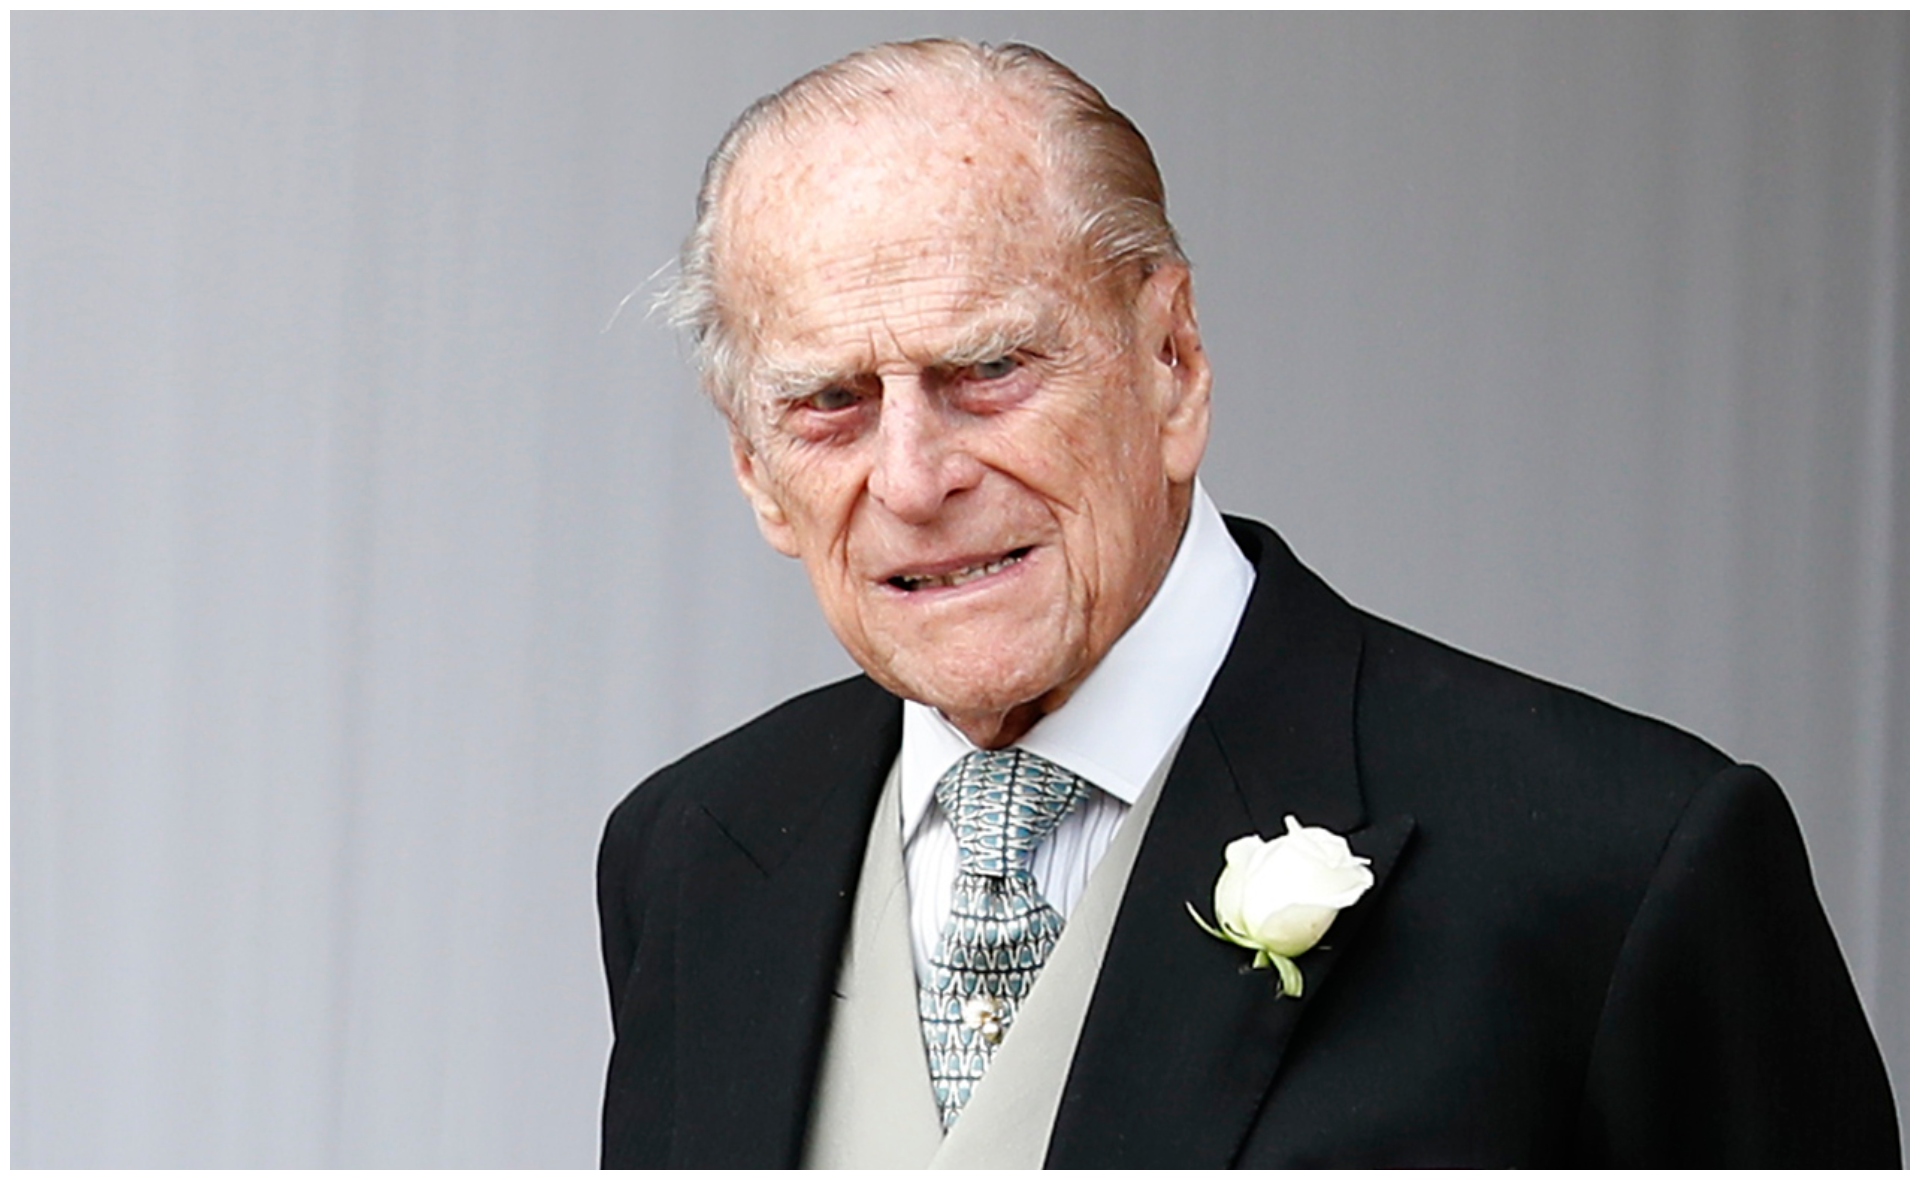 Duke of Edinburgh’s unique final wishes: Here’s what to expect in the heartbreaking aftermath of Prince Philip’s death